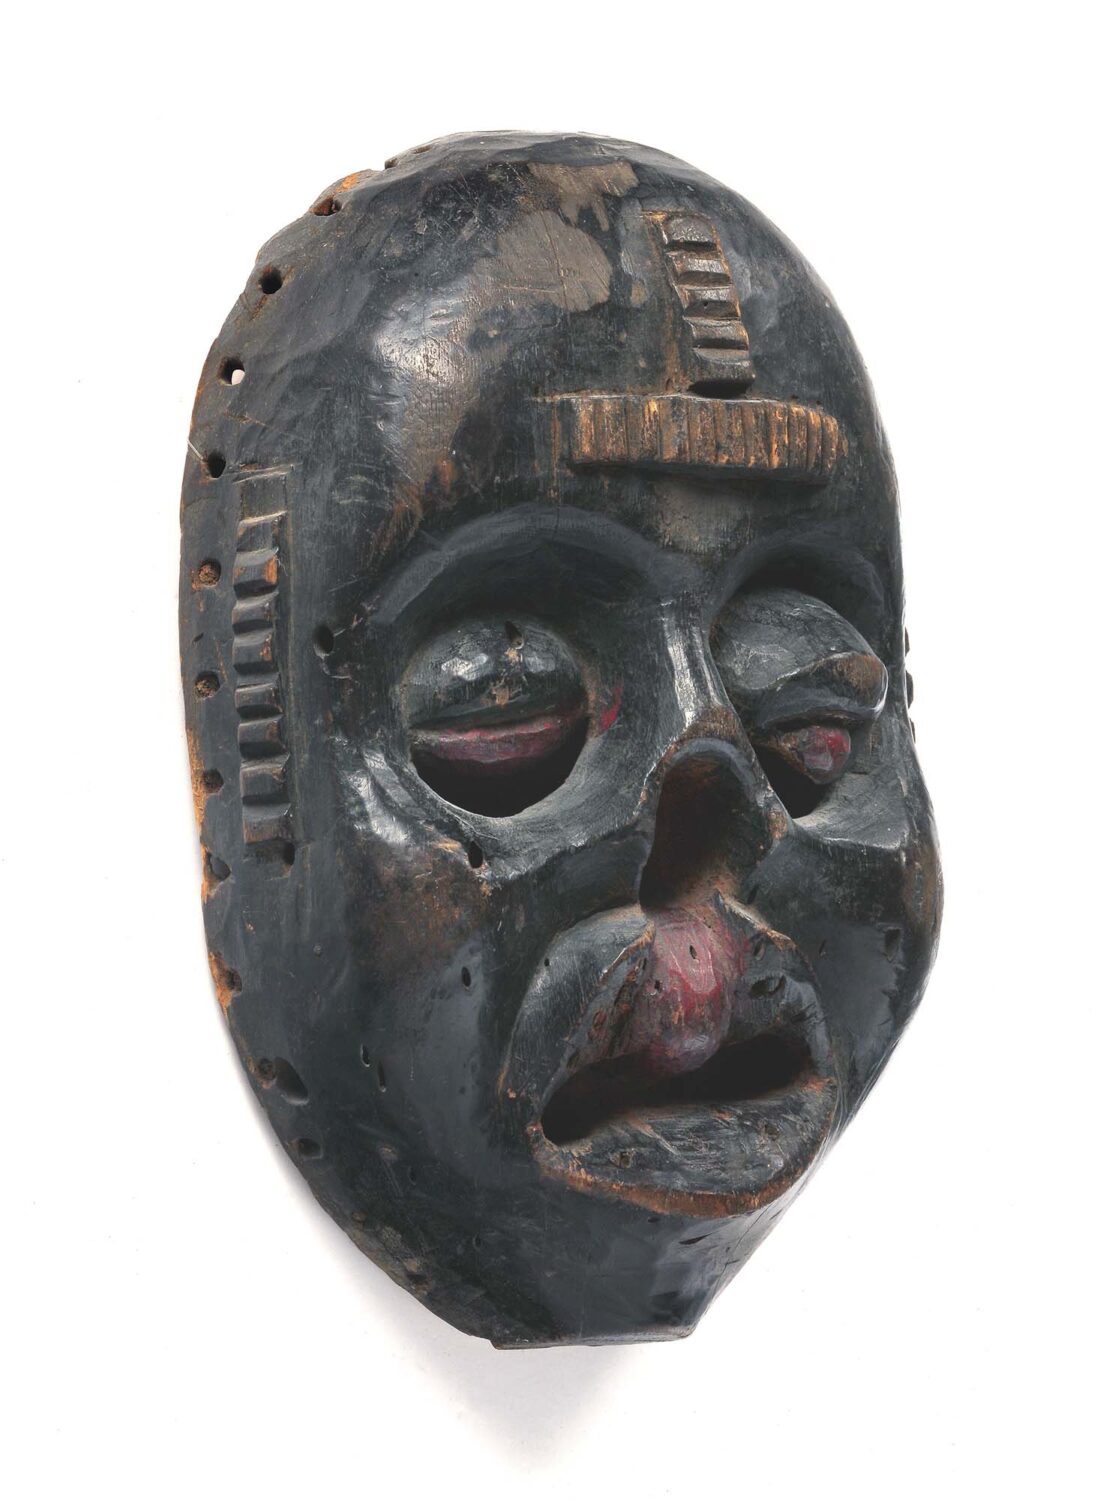 thumbnail of Ekpo Society mask, missing nose and upper lip.